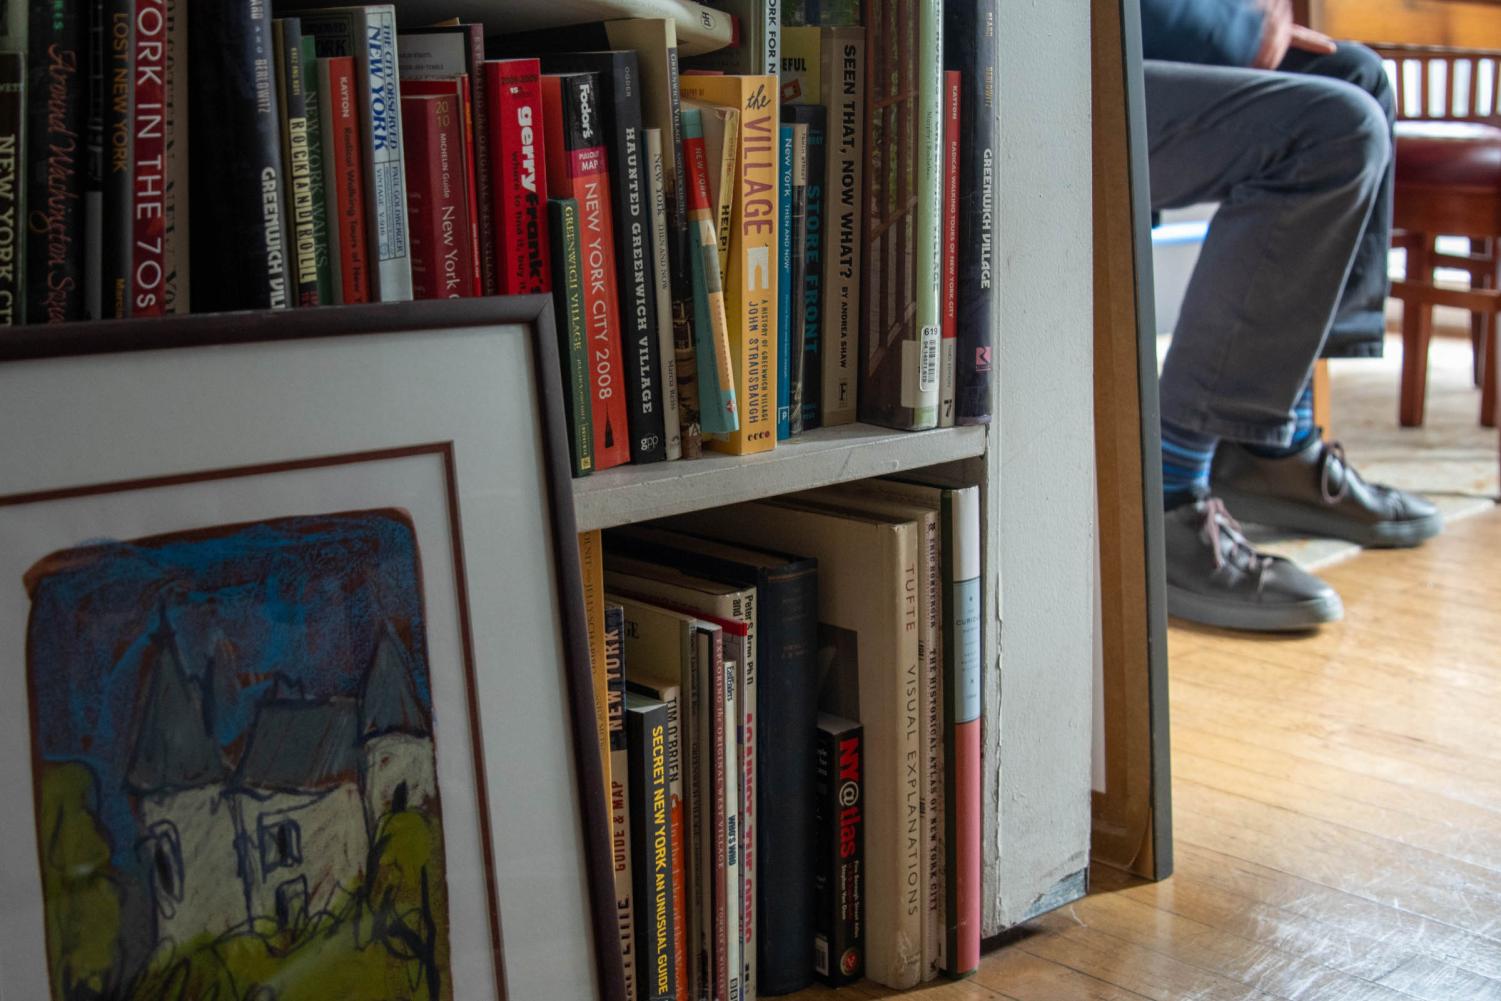 The bottom of Alan Grossman's bookshelf is full of colorful books about New York, and there is a framed painting leaning against it. In the background, Grossman sits at a table wearing navy blue pants and shoes.